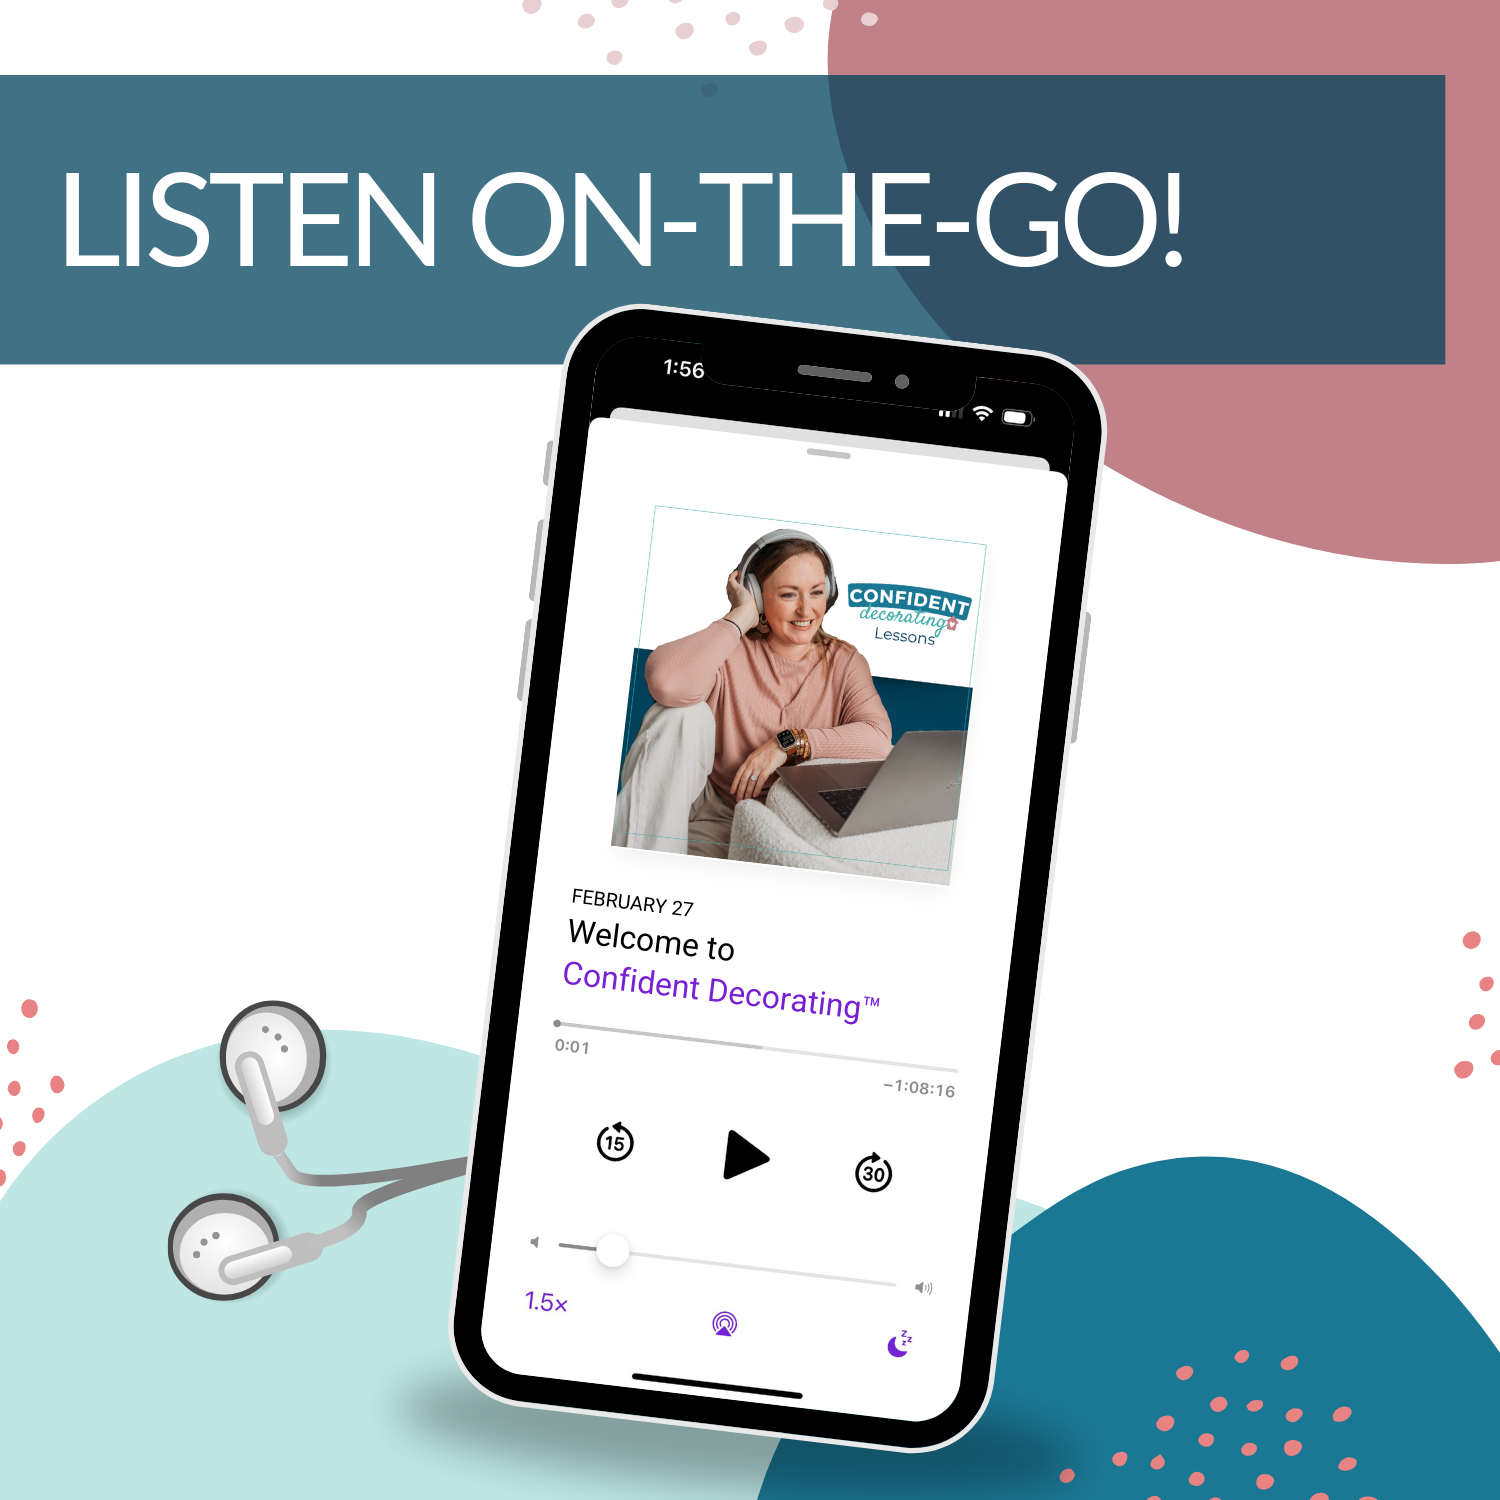 Smartphone displaying a podcast episode titled &quot;Welcome to Confident Decorating™&quot; with a guest in pink attire, beside a pair of earphones. The above text reads &quot;LISTEN ON-THE-GO!&quot;—perfect for inspiration on your My Homier Home Confident Decorating™ Self-Study.